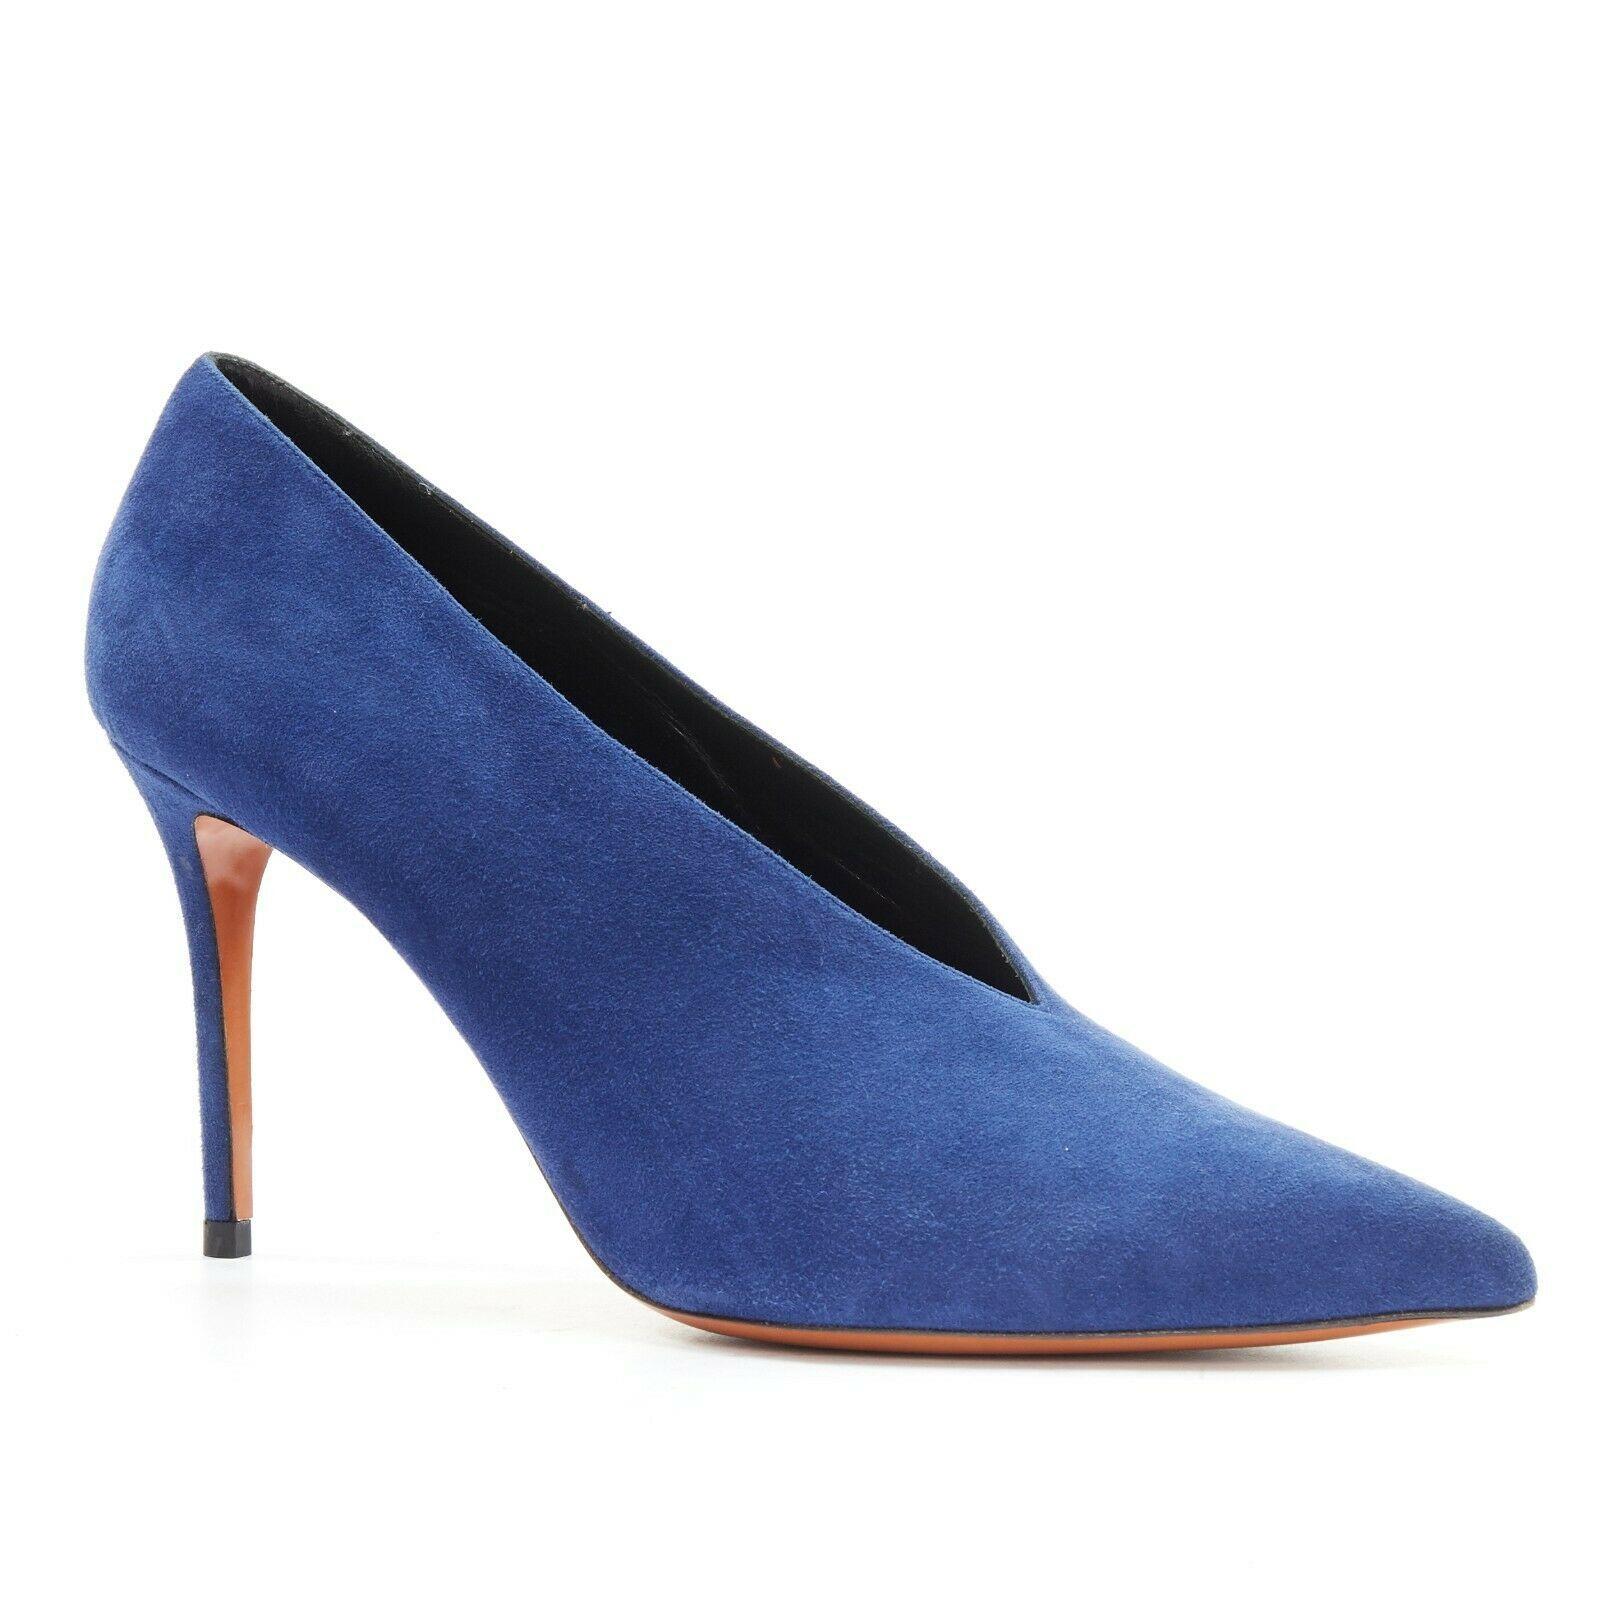 new CELINE PHOEBE PHILO blue suede V-neck vamp pointed toe pump EU39.5
CELINE BY PHOEBE PHILO
Dark blue suede leather upper. V-neck cut vamp. Pointed toe. Tonal stitching. Covered heel. Slim high heel. 
Made in Italy.

CONDITION
New without box,